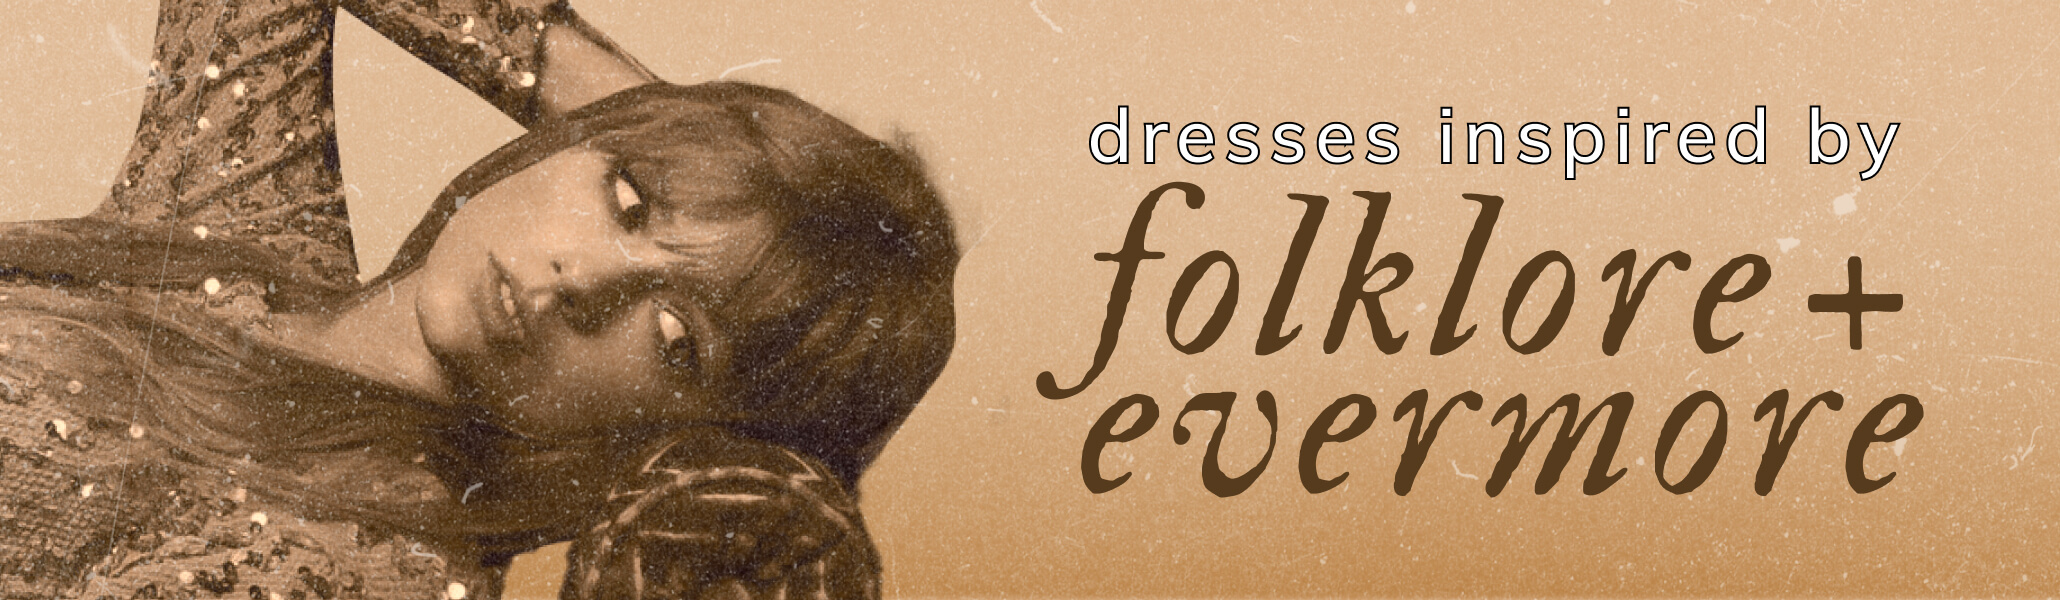 Shop Taylor swift folklore evermore album inspired dresses